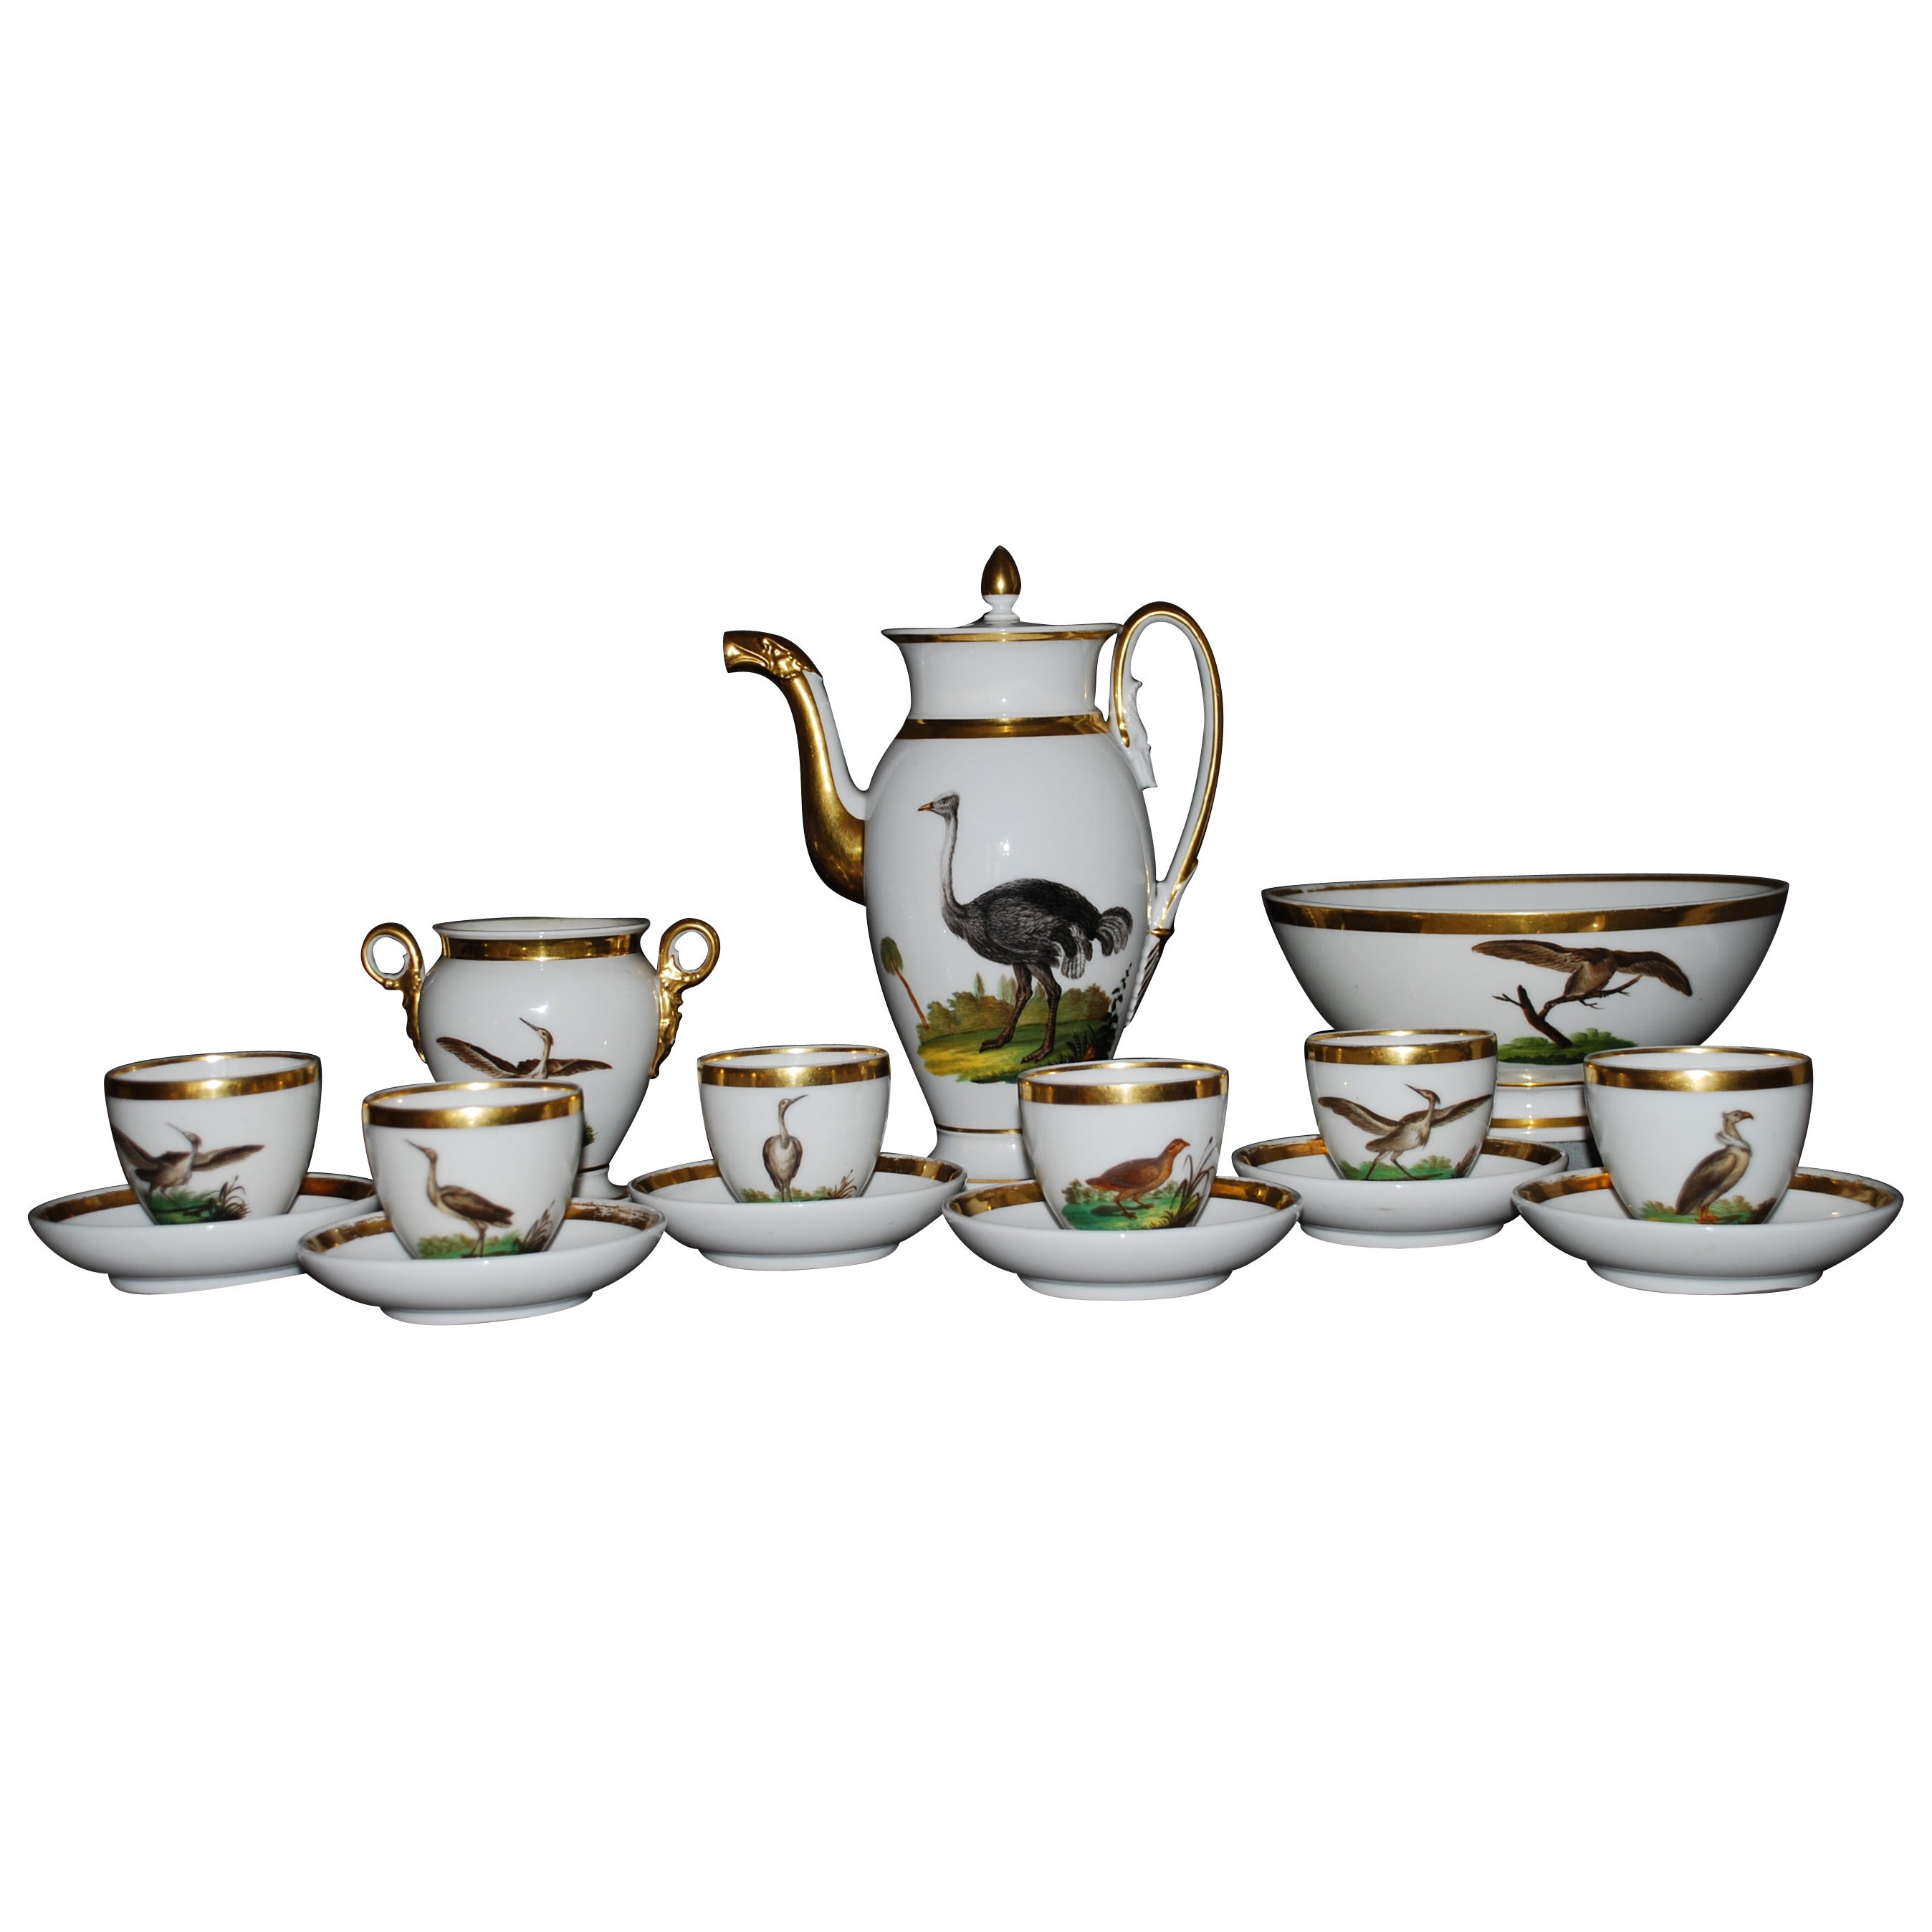 Paris porcelain bird coffee service. French Empire gilt porcelain ornithological coffee service for six with hand painted exotic birds. Coffee pot with ostrich and emu, bowl with eagles, sugar pot with herons and six cups and saucers with various